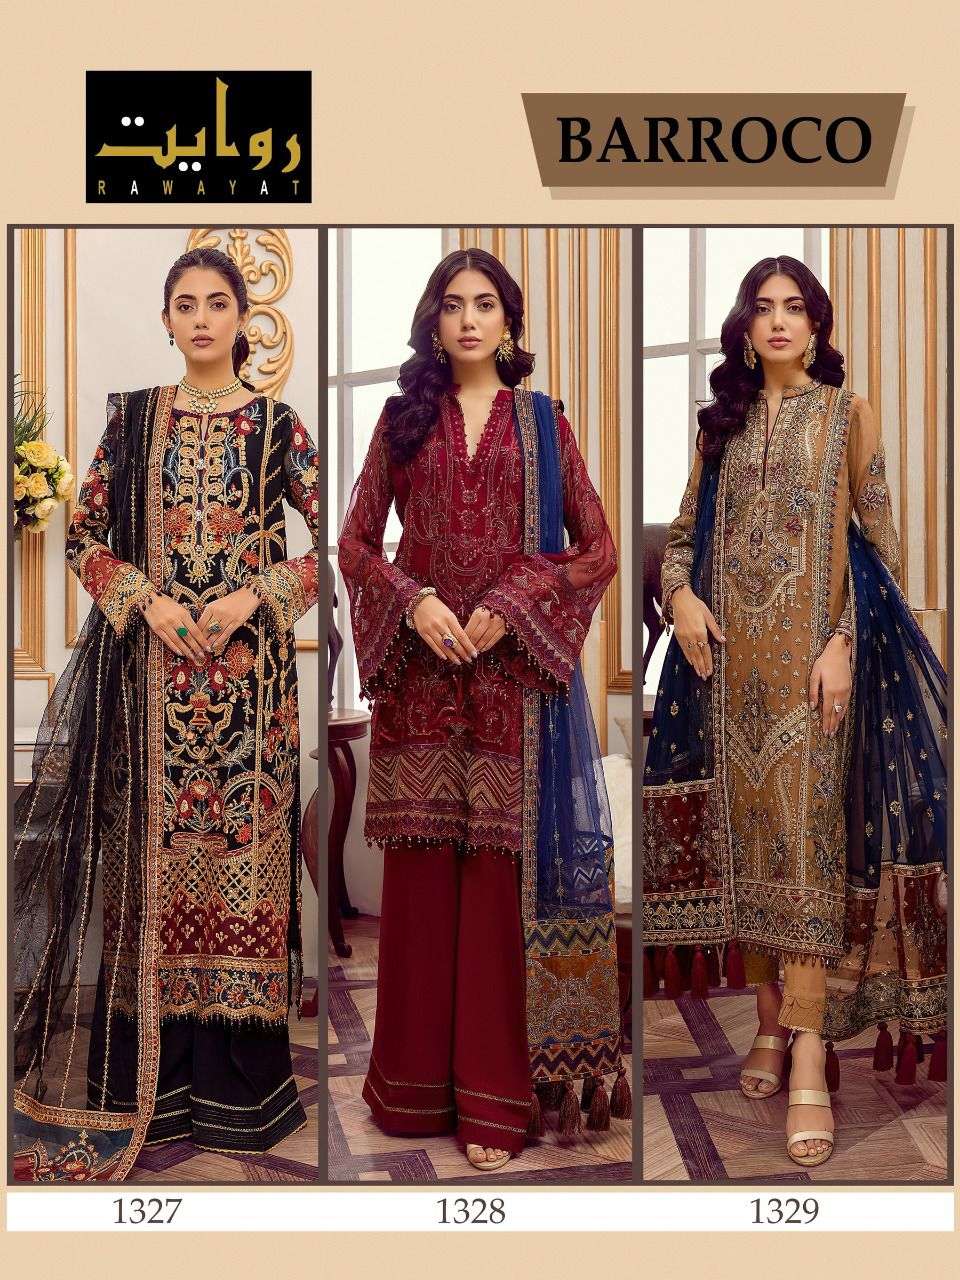 RAWAYAT PRESENTS BARROCO FOX GEORGETTE WITH EMBROIDERY WHOLESALE PAKISTANI SUITS